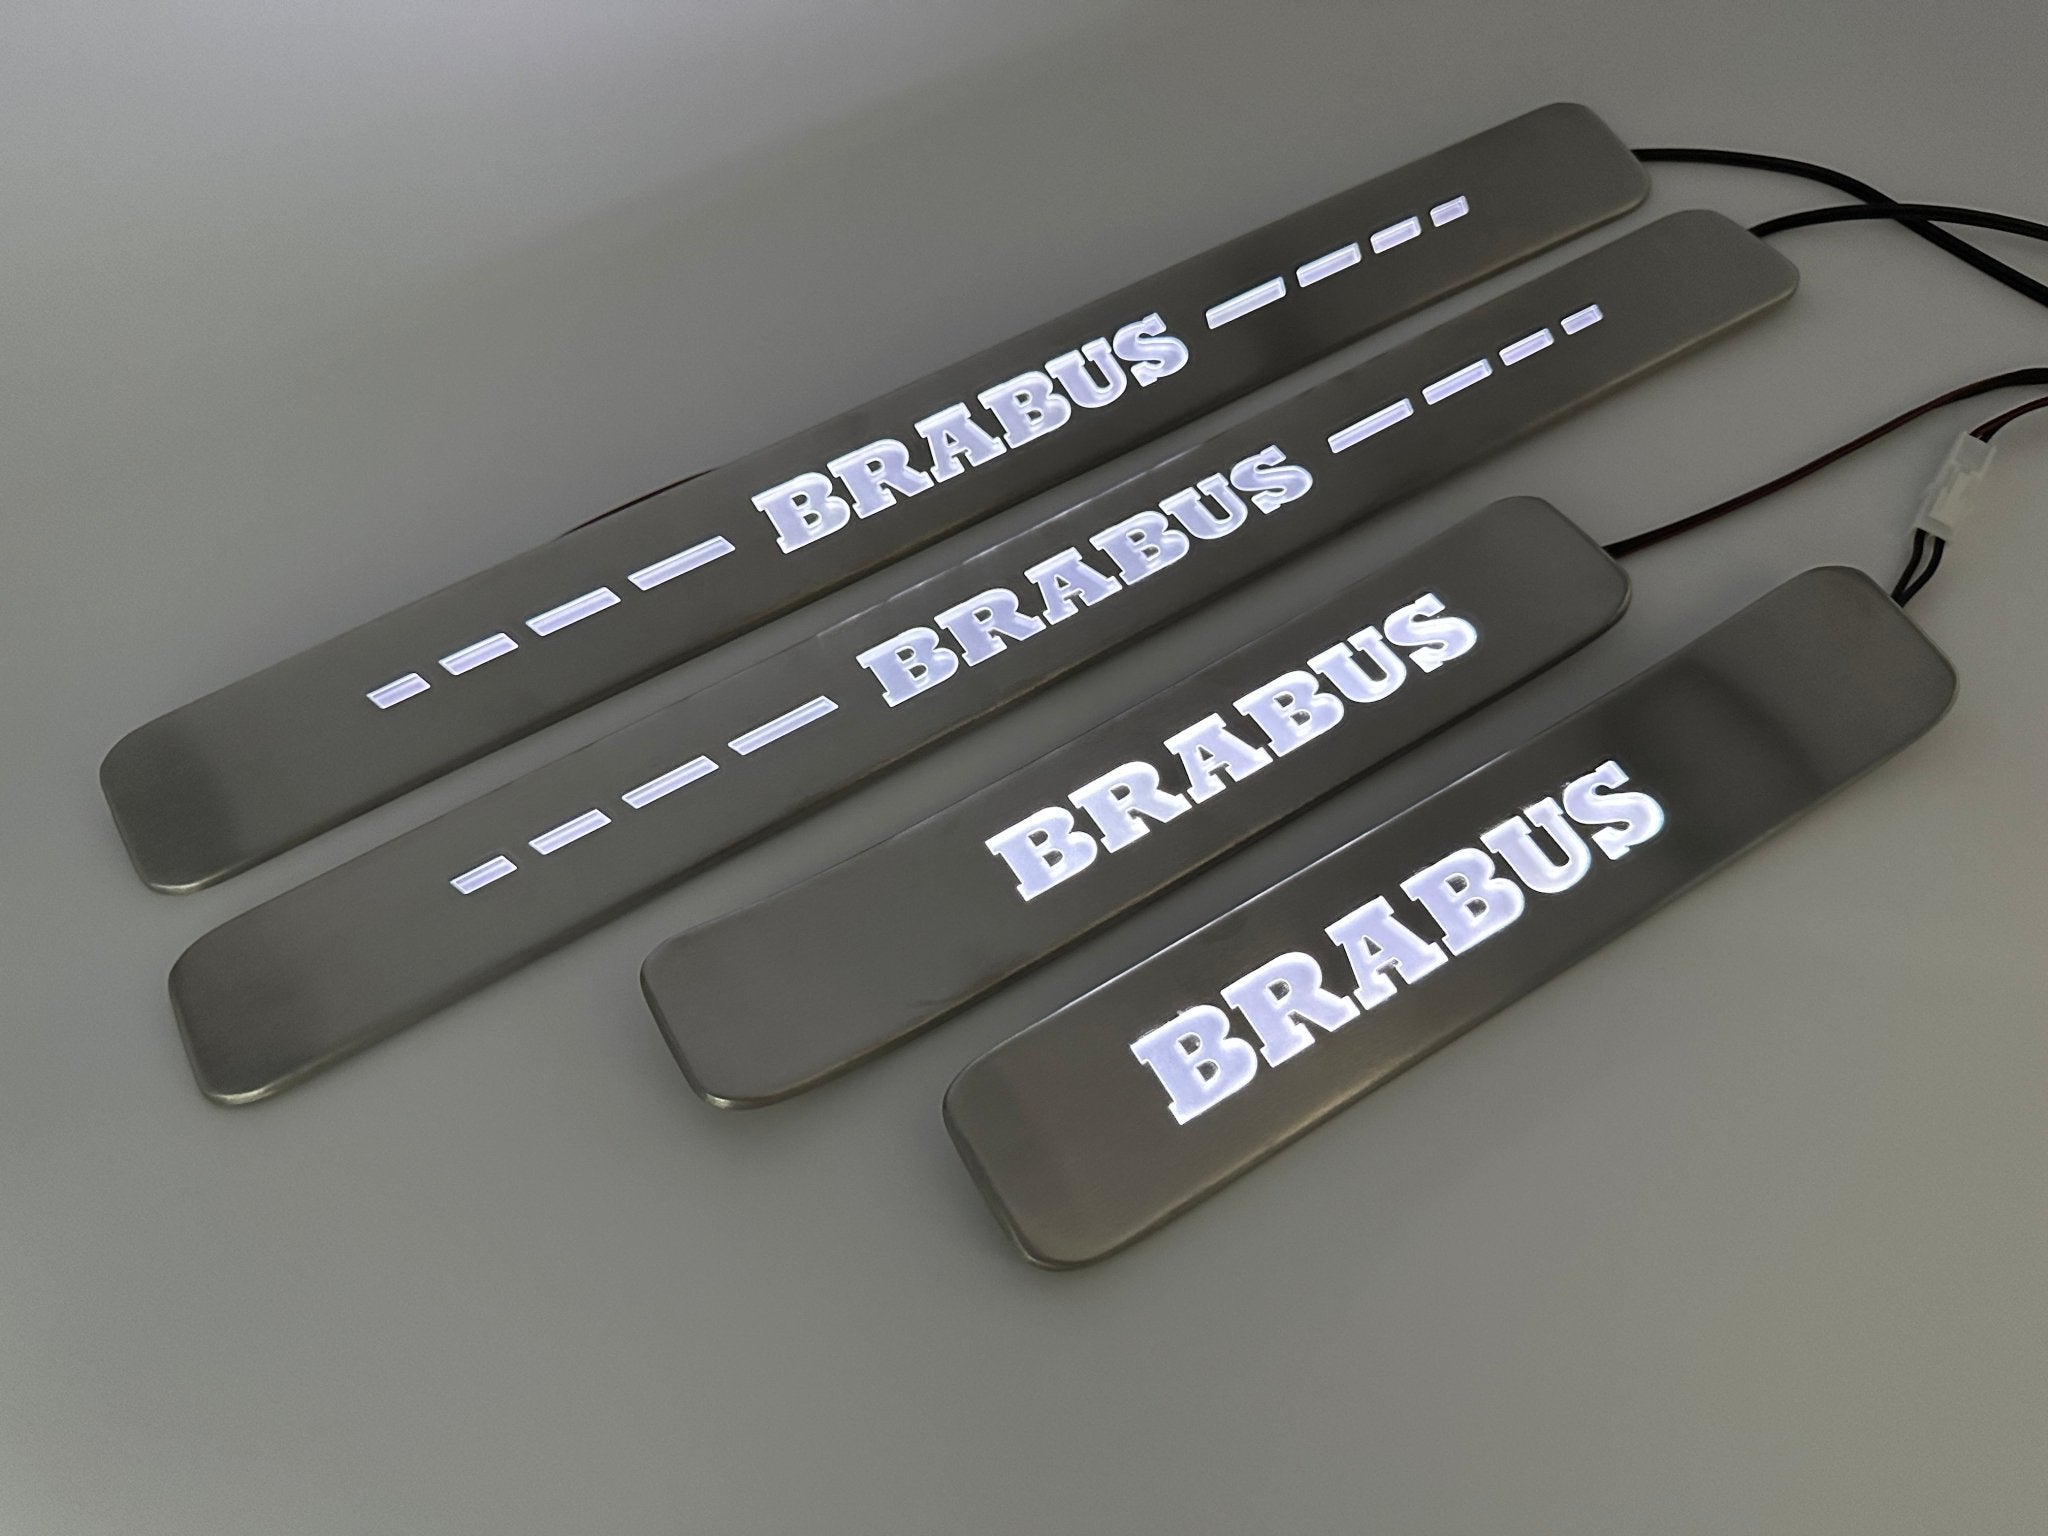 Brabus style Door Sills Metal White LED Illumination 4 pcs for Mercedes-Benz G-Wagon w463a w464